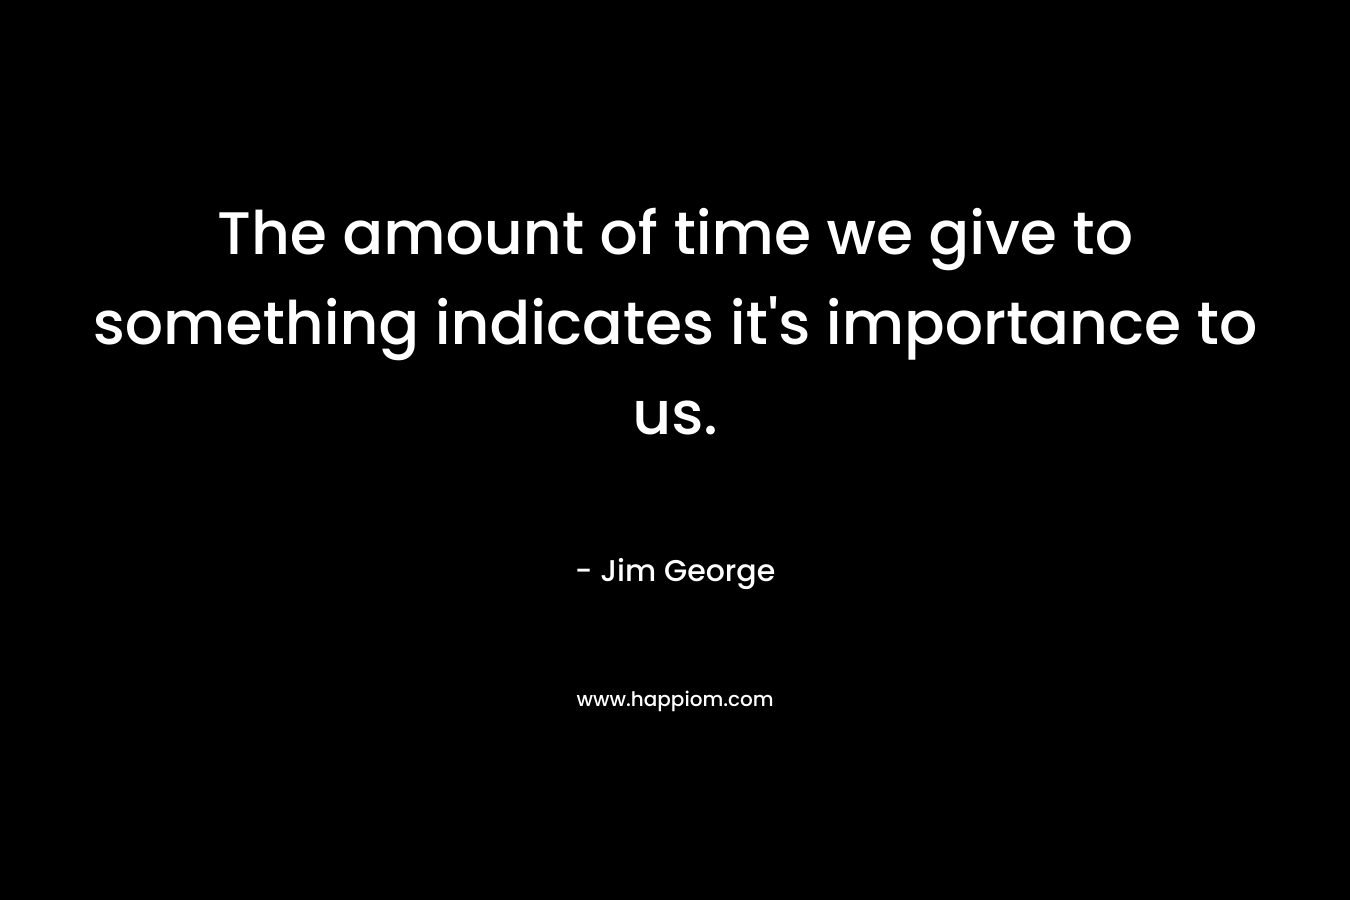 The amount of time we give to something indicates it’s importance to us. – Jim George